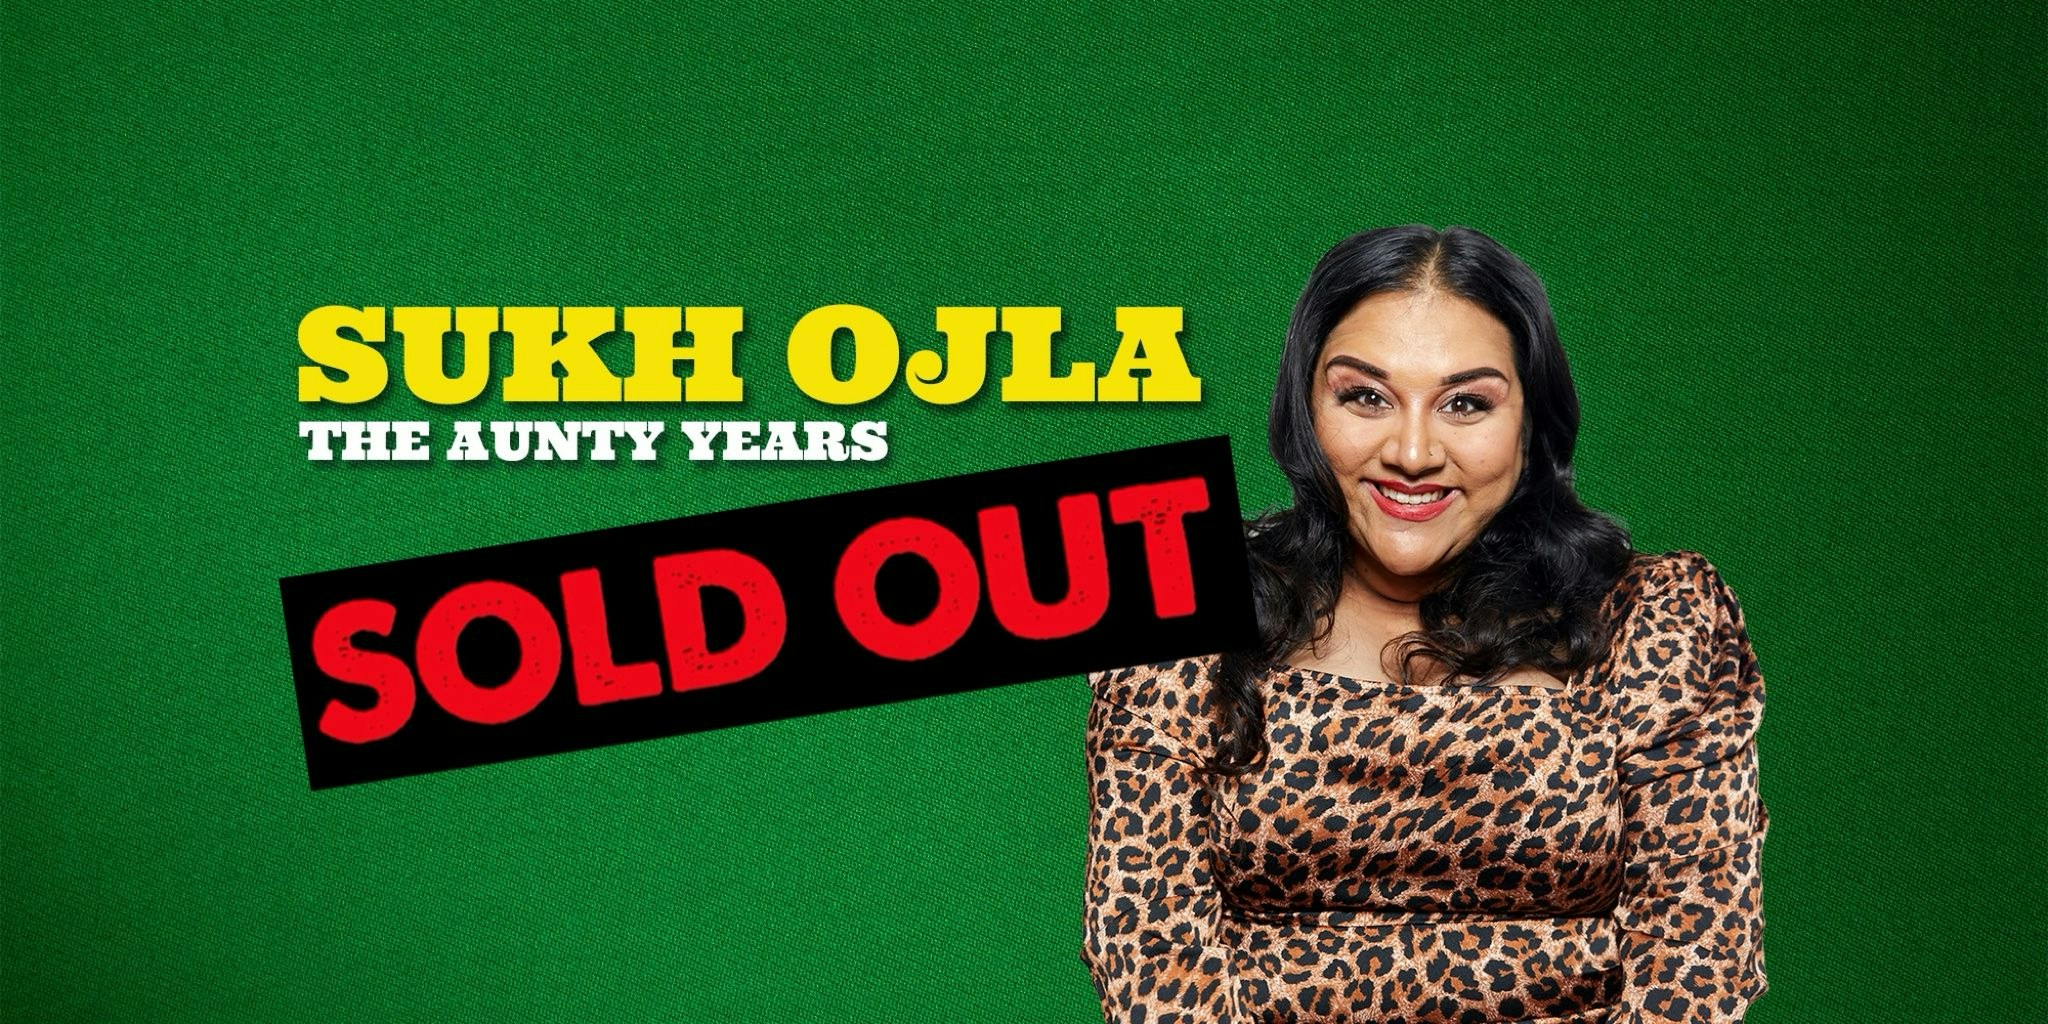 Sukh Ojla : The Aunty Years –  Milton Keynes ** SOLD OUT – Join Waiting List **